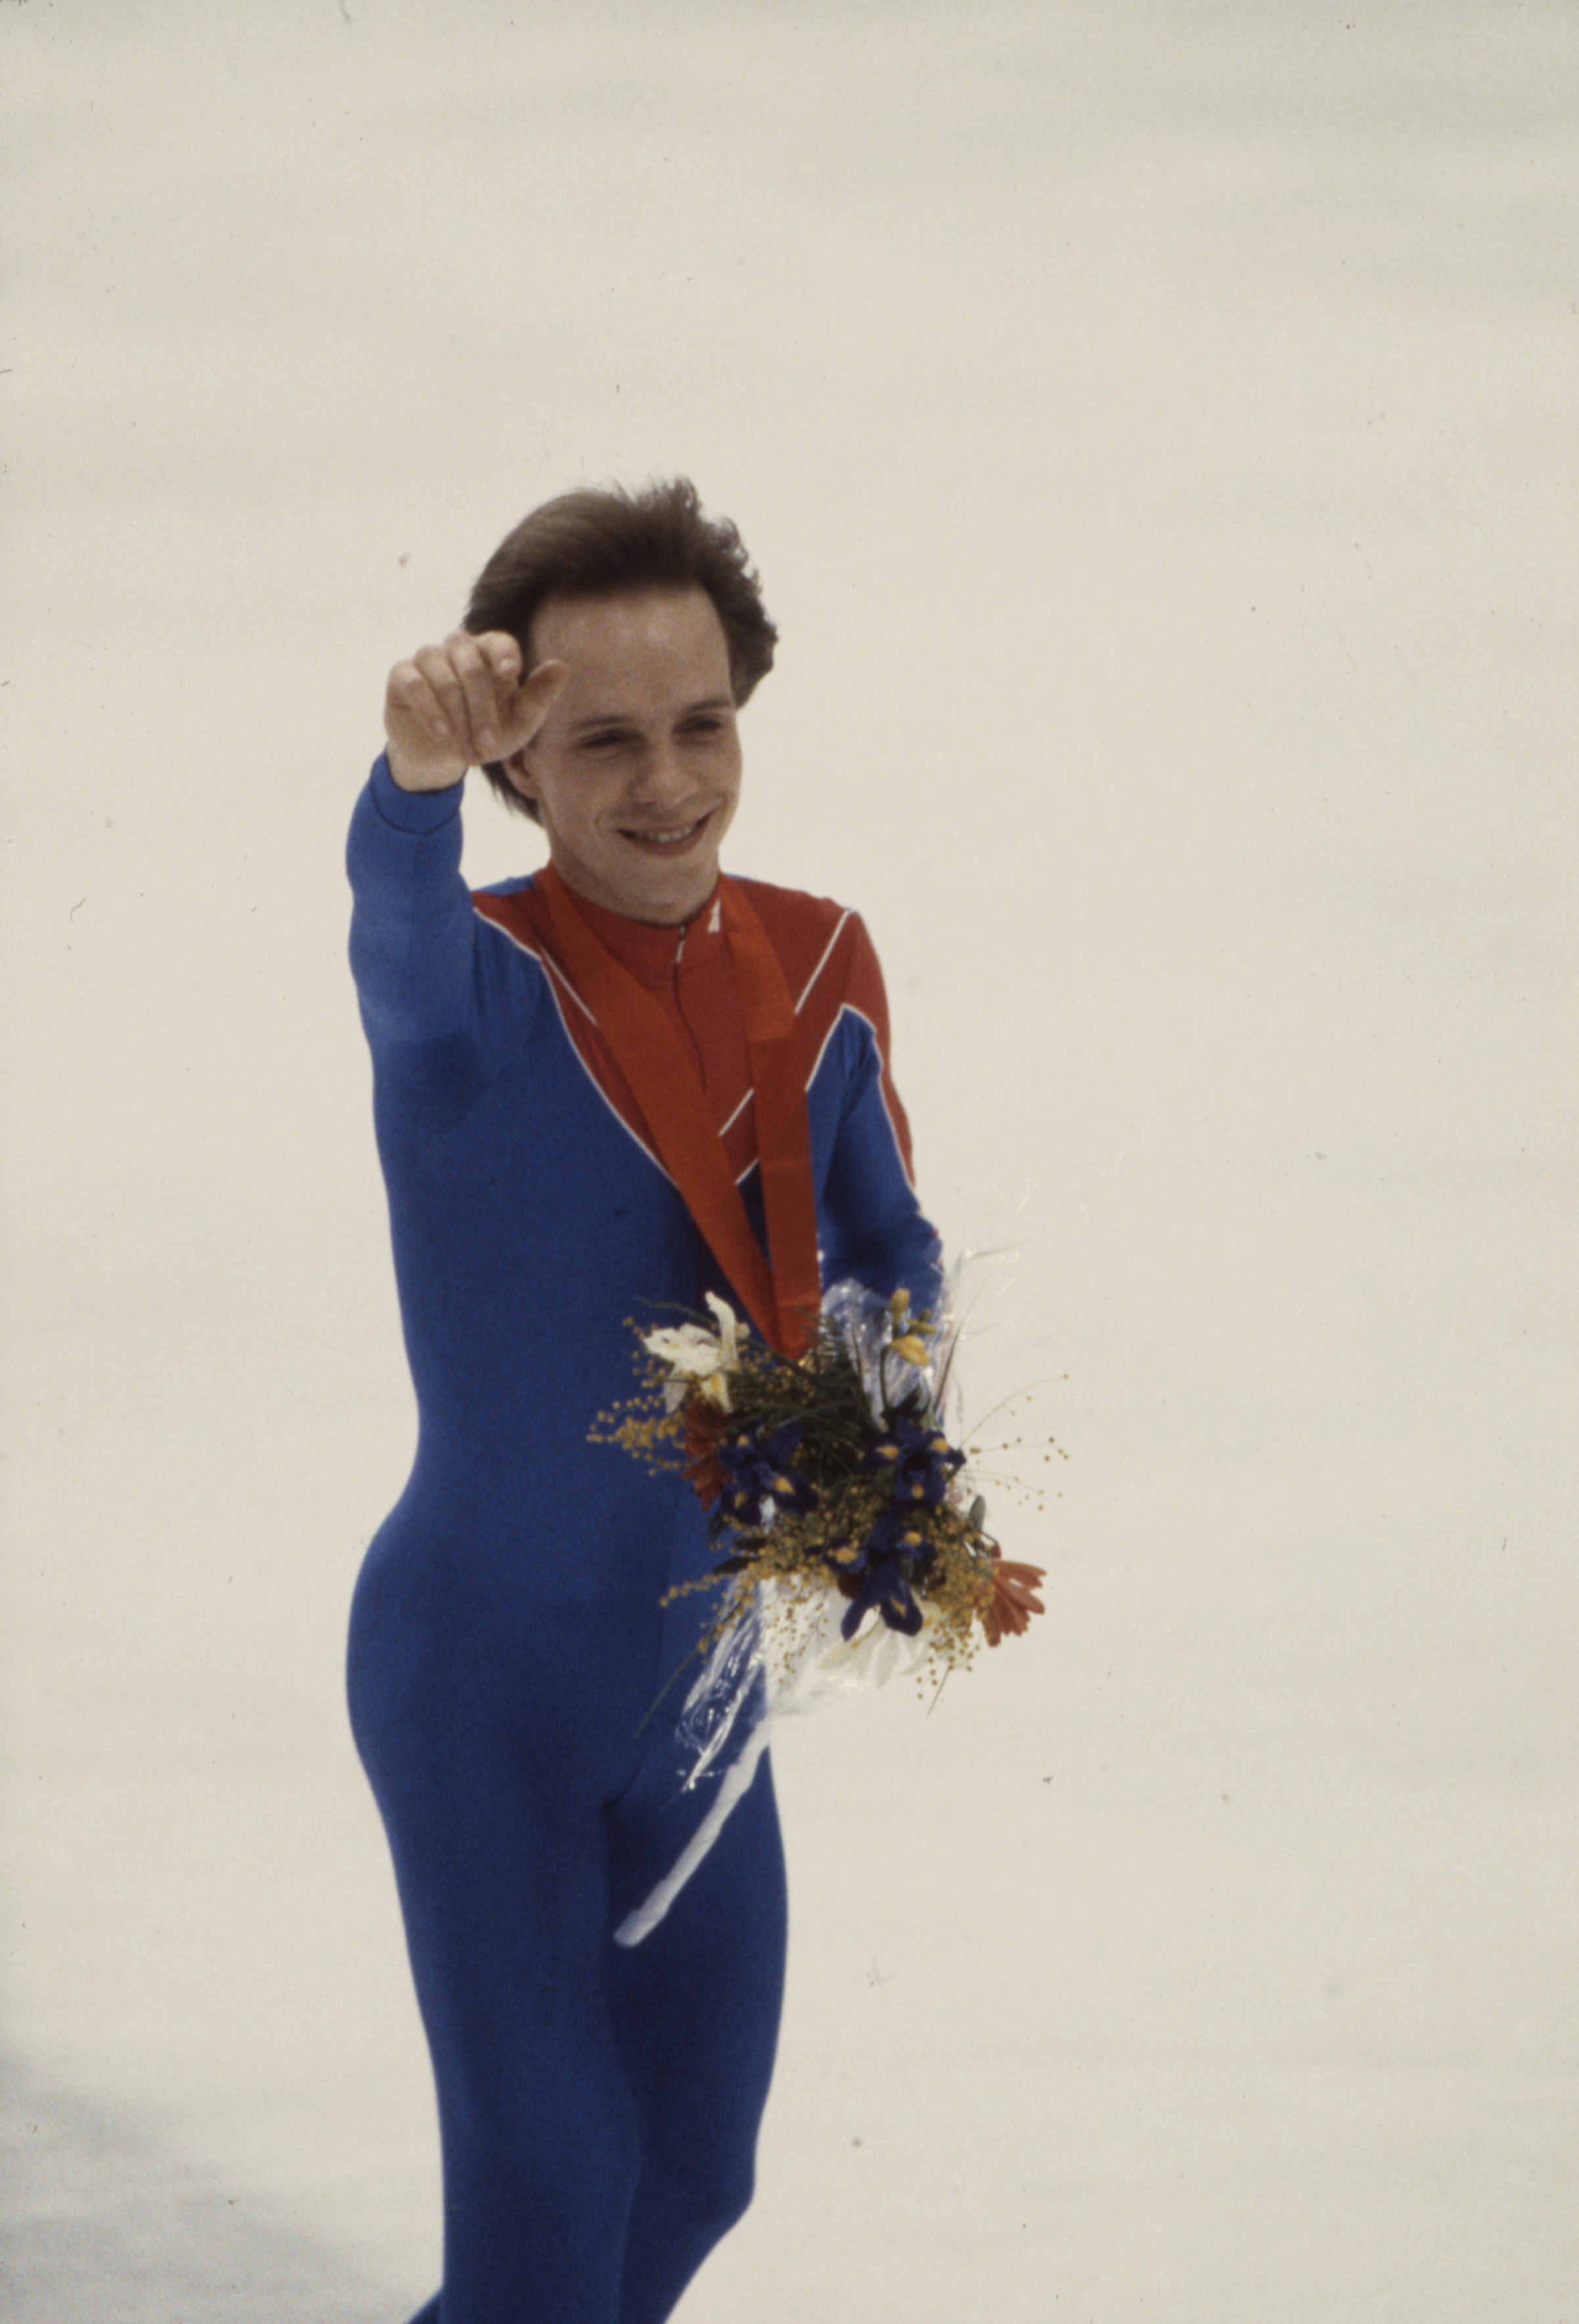 Scott Hamilton during the medal ceremony for the Men's figure skating event at the 1984 Winter Olympics on February 1, 1984 | Source: Getty Images